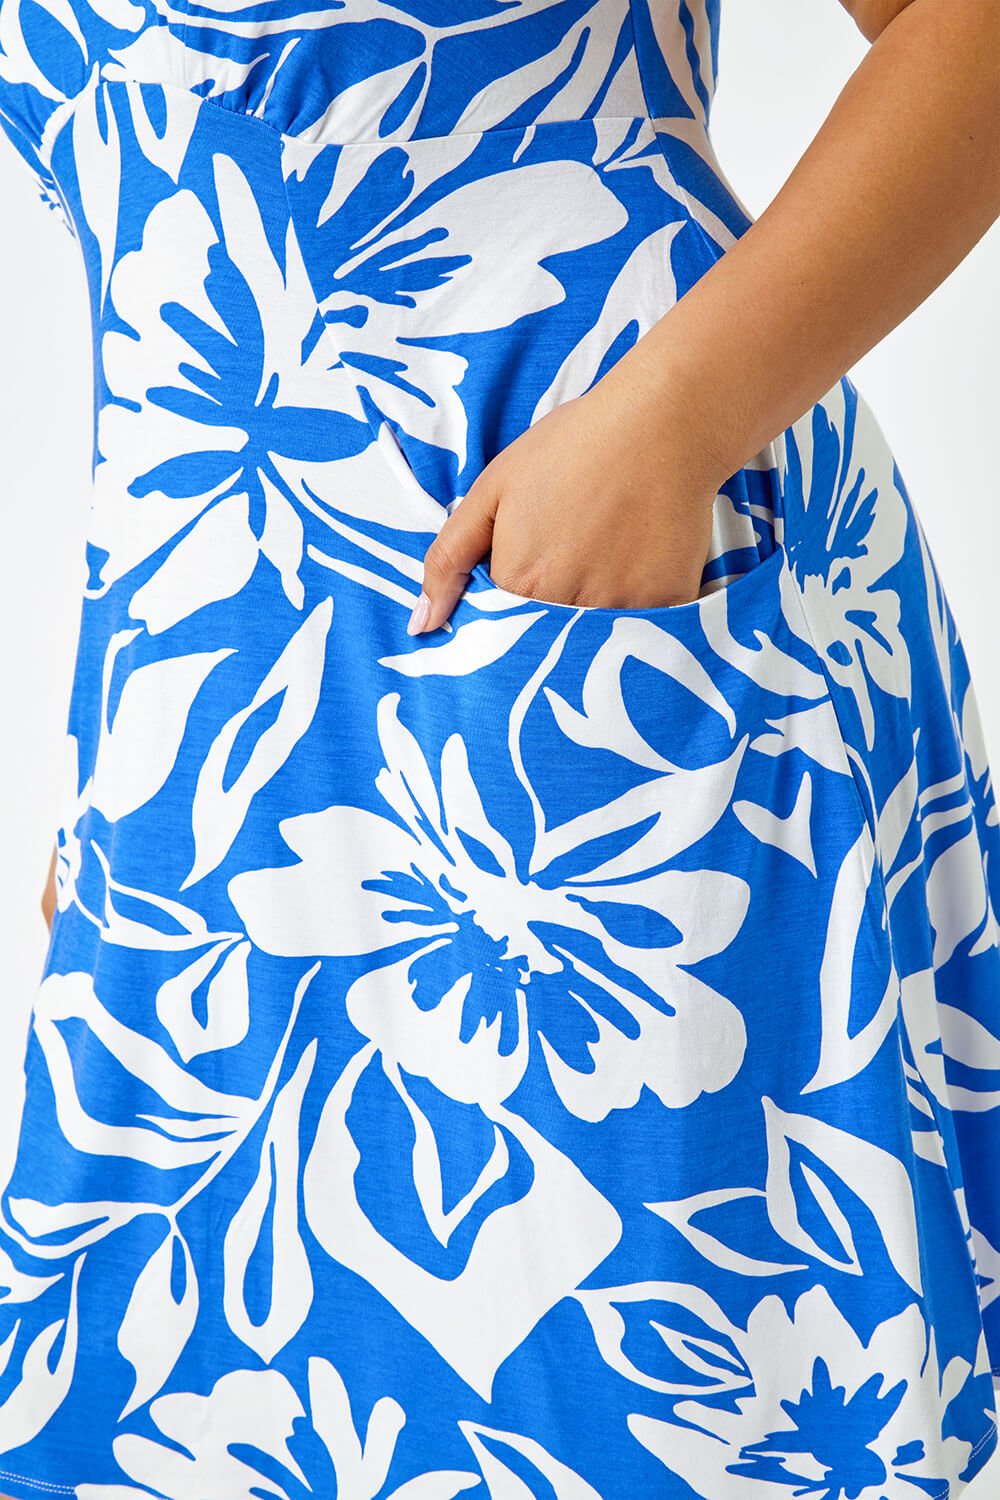 Blue Curve Sleeveless Floral Stretch Dress, Image 5 of 5